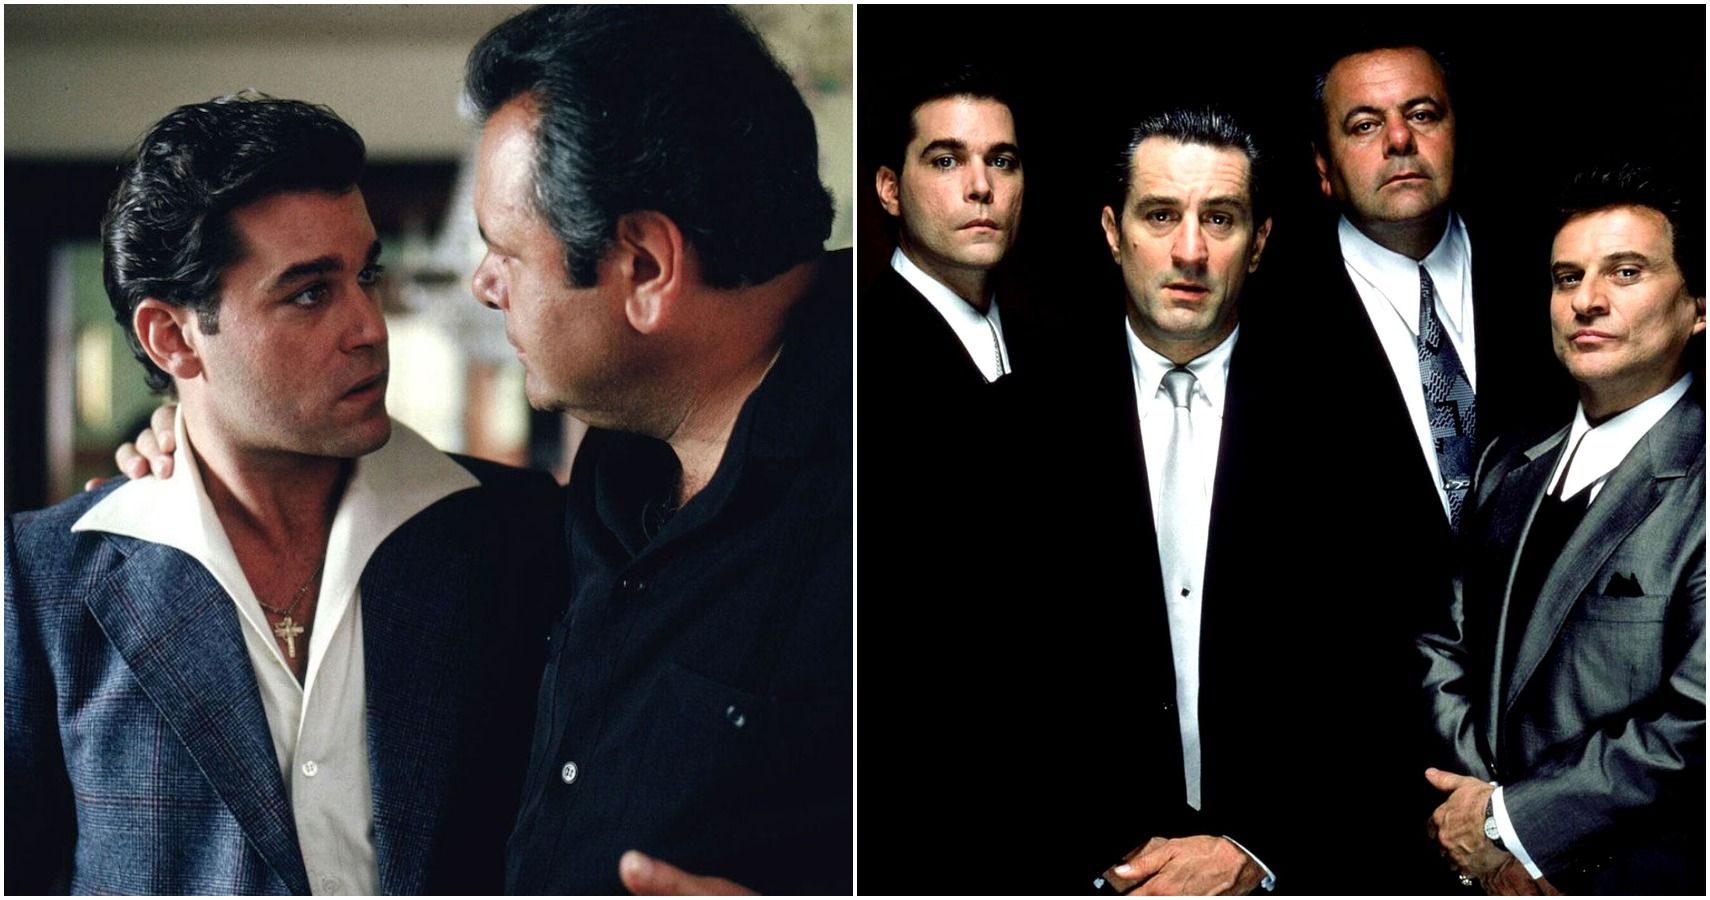 Goodfellas 10 Things The Movie Changed From The Real Story.